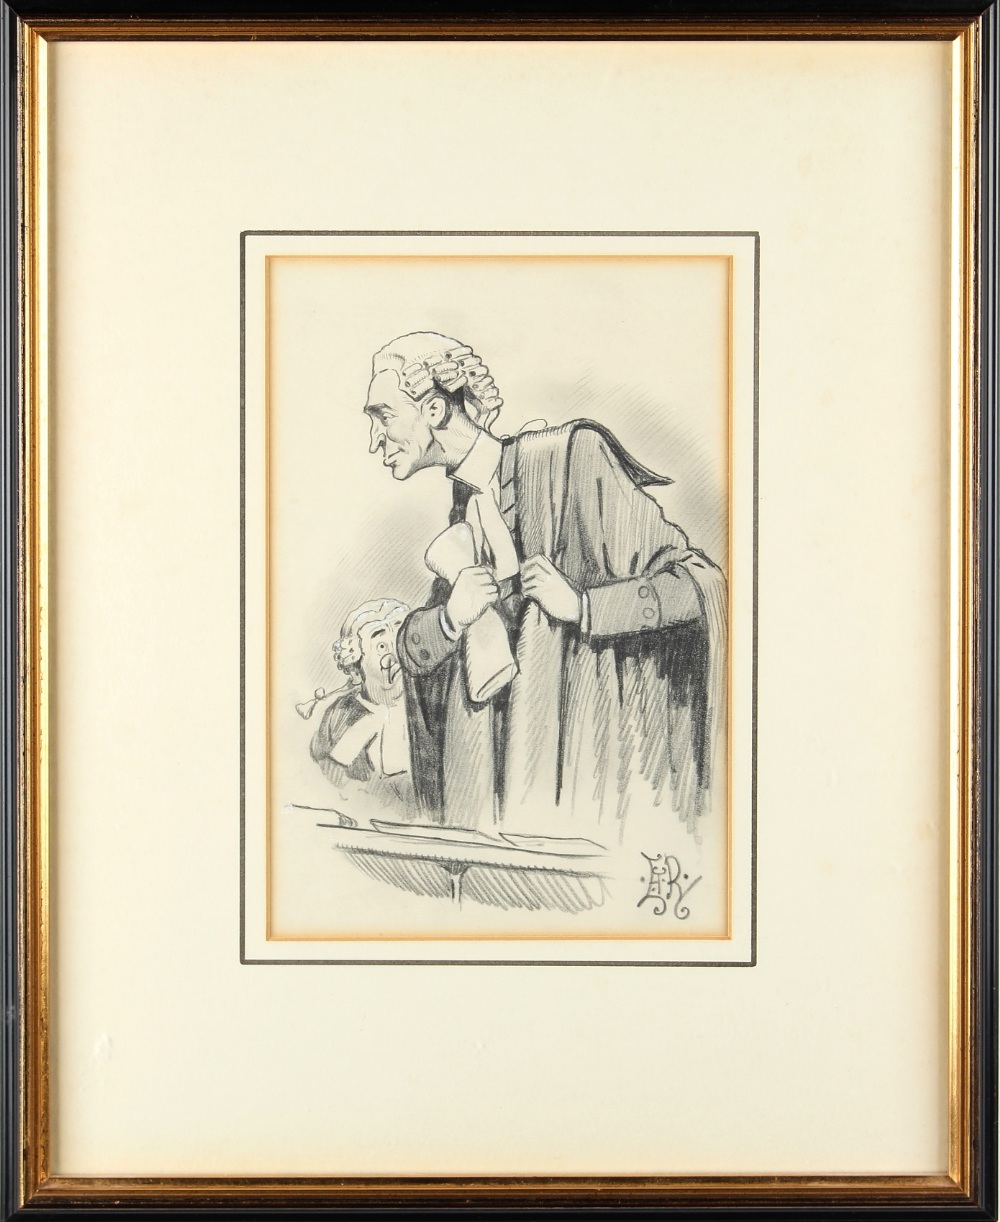 Property of a gentleman - Edward Tennyson Reed (1860-1933) - A JUDICIAL FIGURE IN COURT - pencil